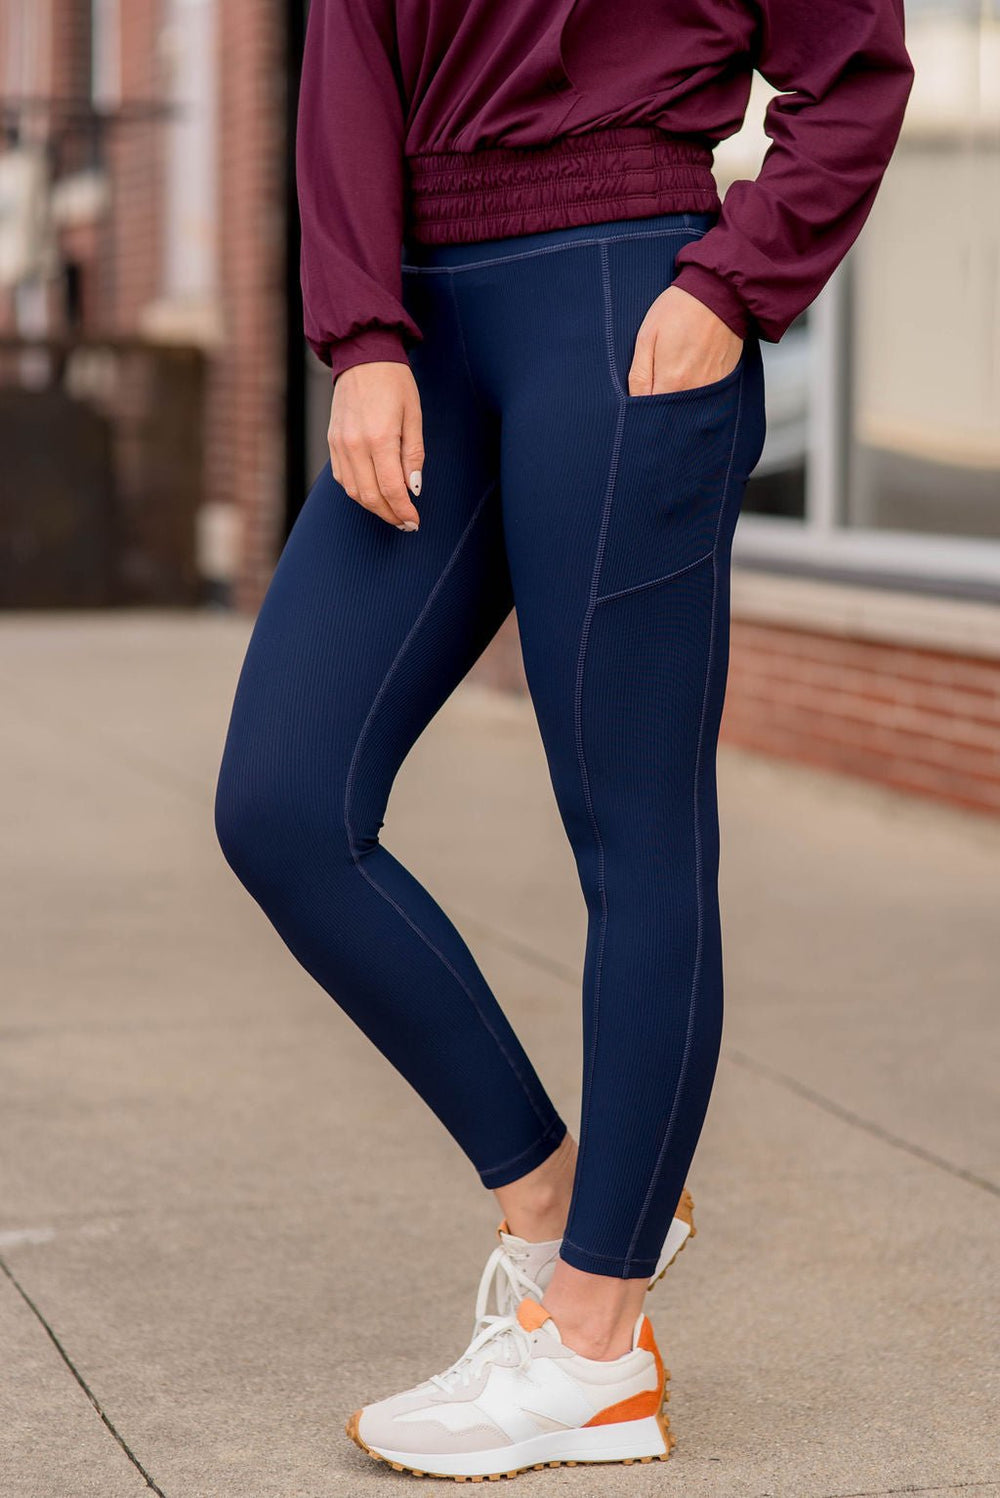 Navy Lululemon leggings with side ruffle details and pockets